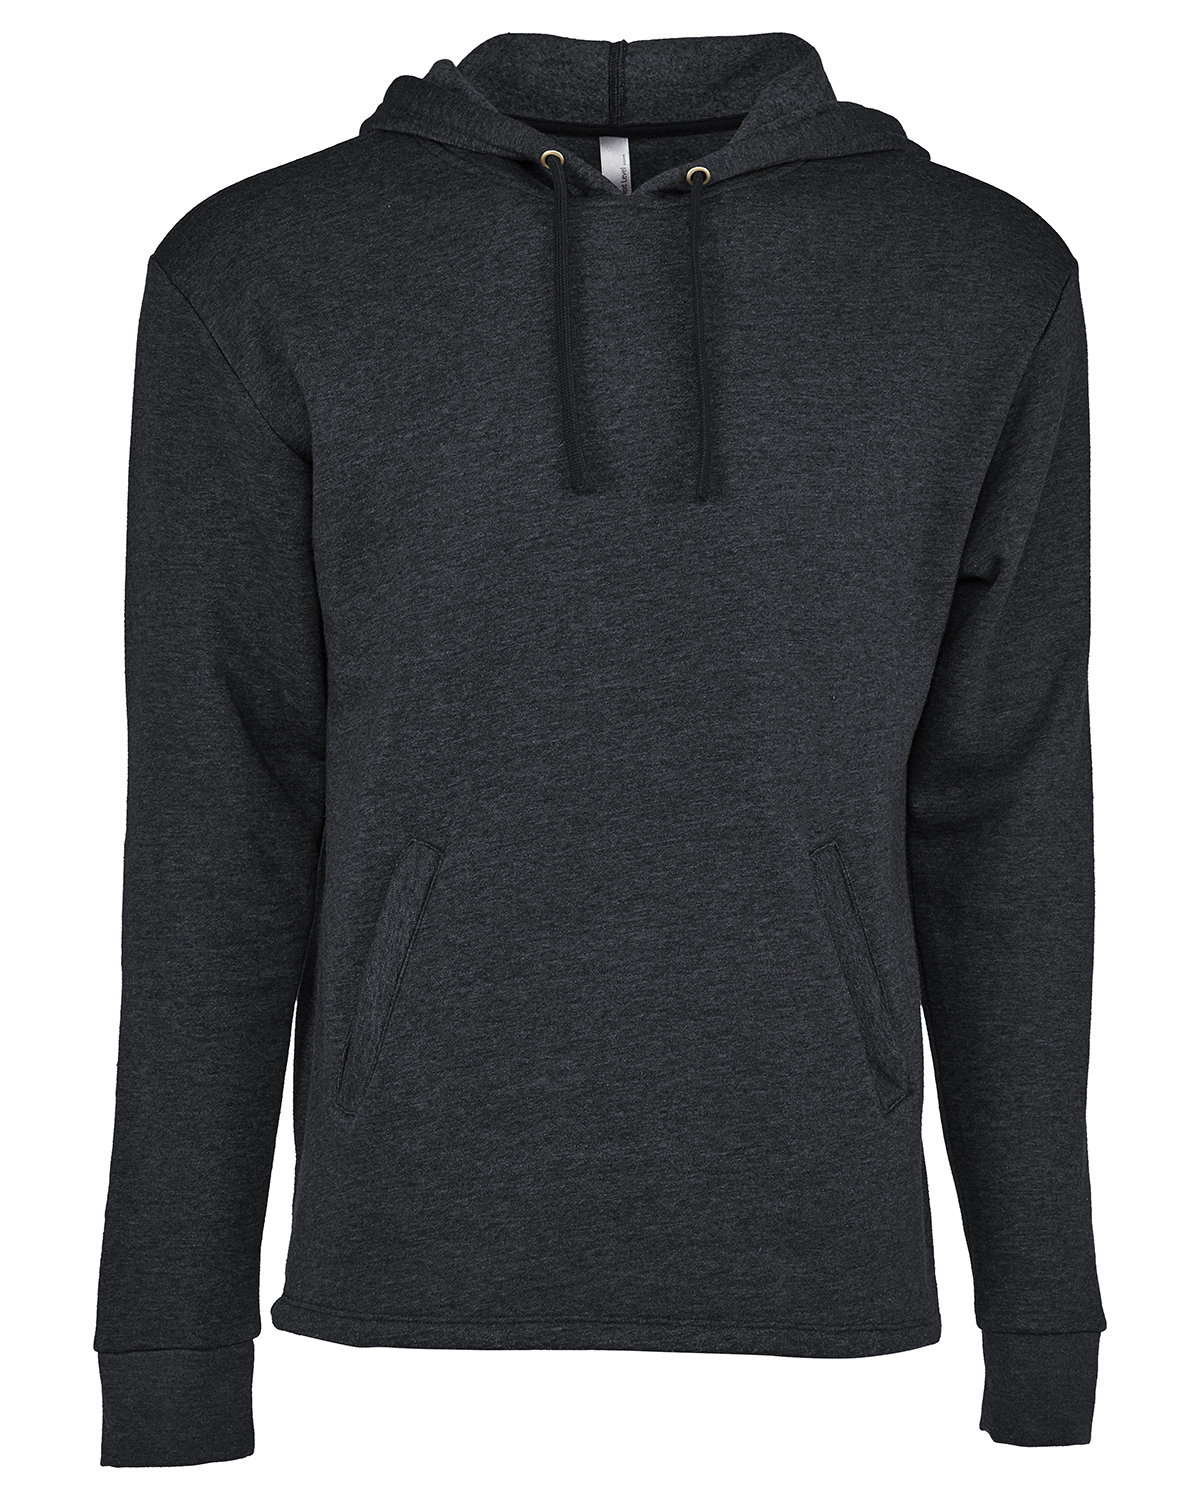 Next Level Apparel Adult PCH Pullover Hoodie | alphabroder Canada